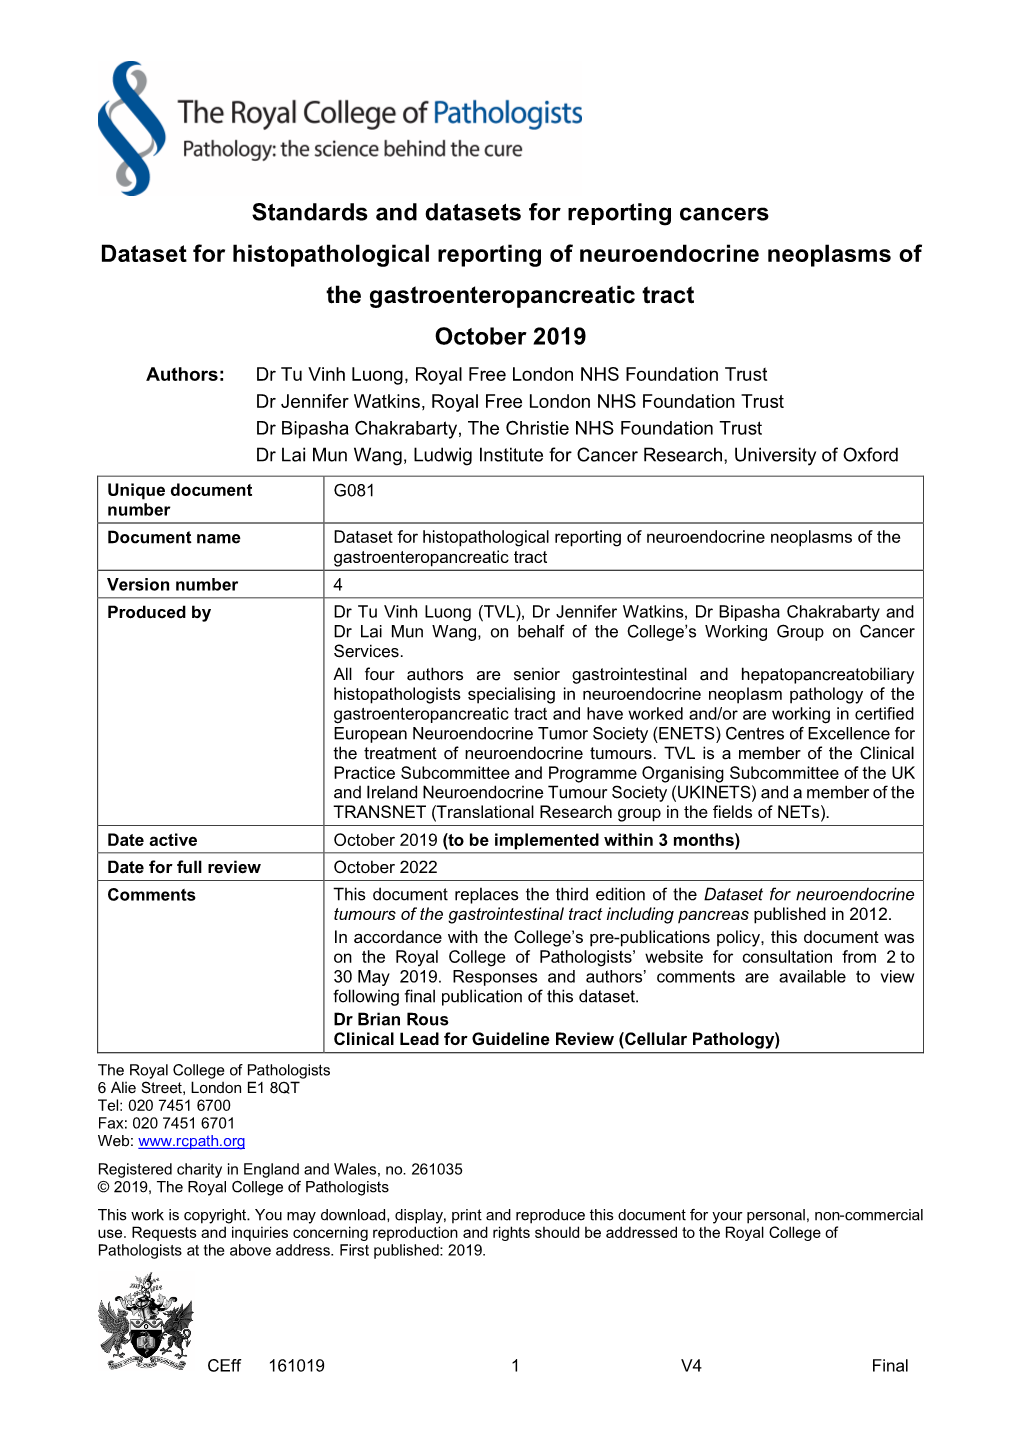 Dataset for Histopathological Reporting of Neuroendocrine Neoplasms Of